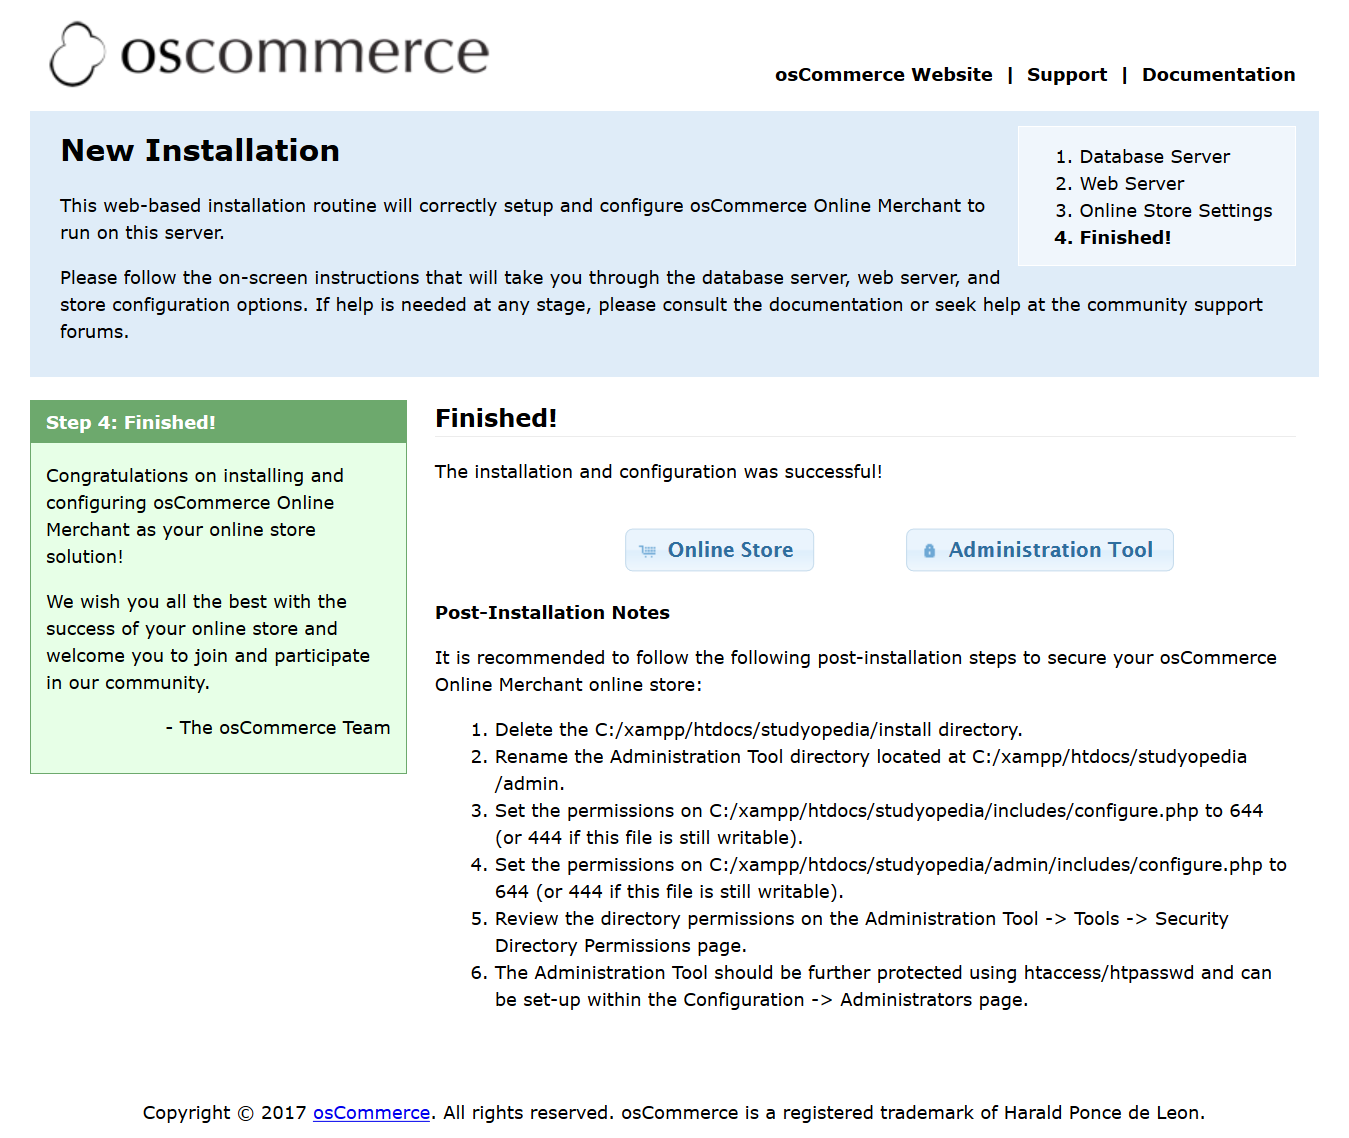 osCommerce installation completed